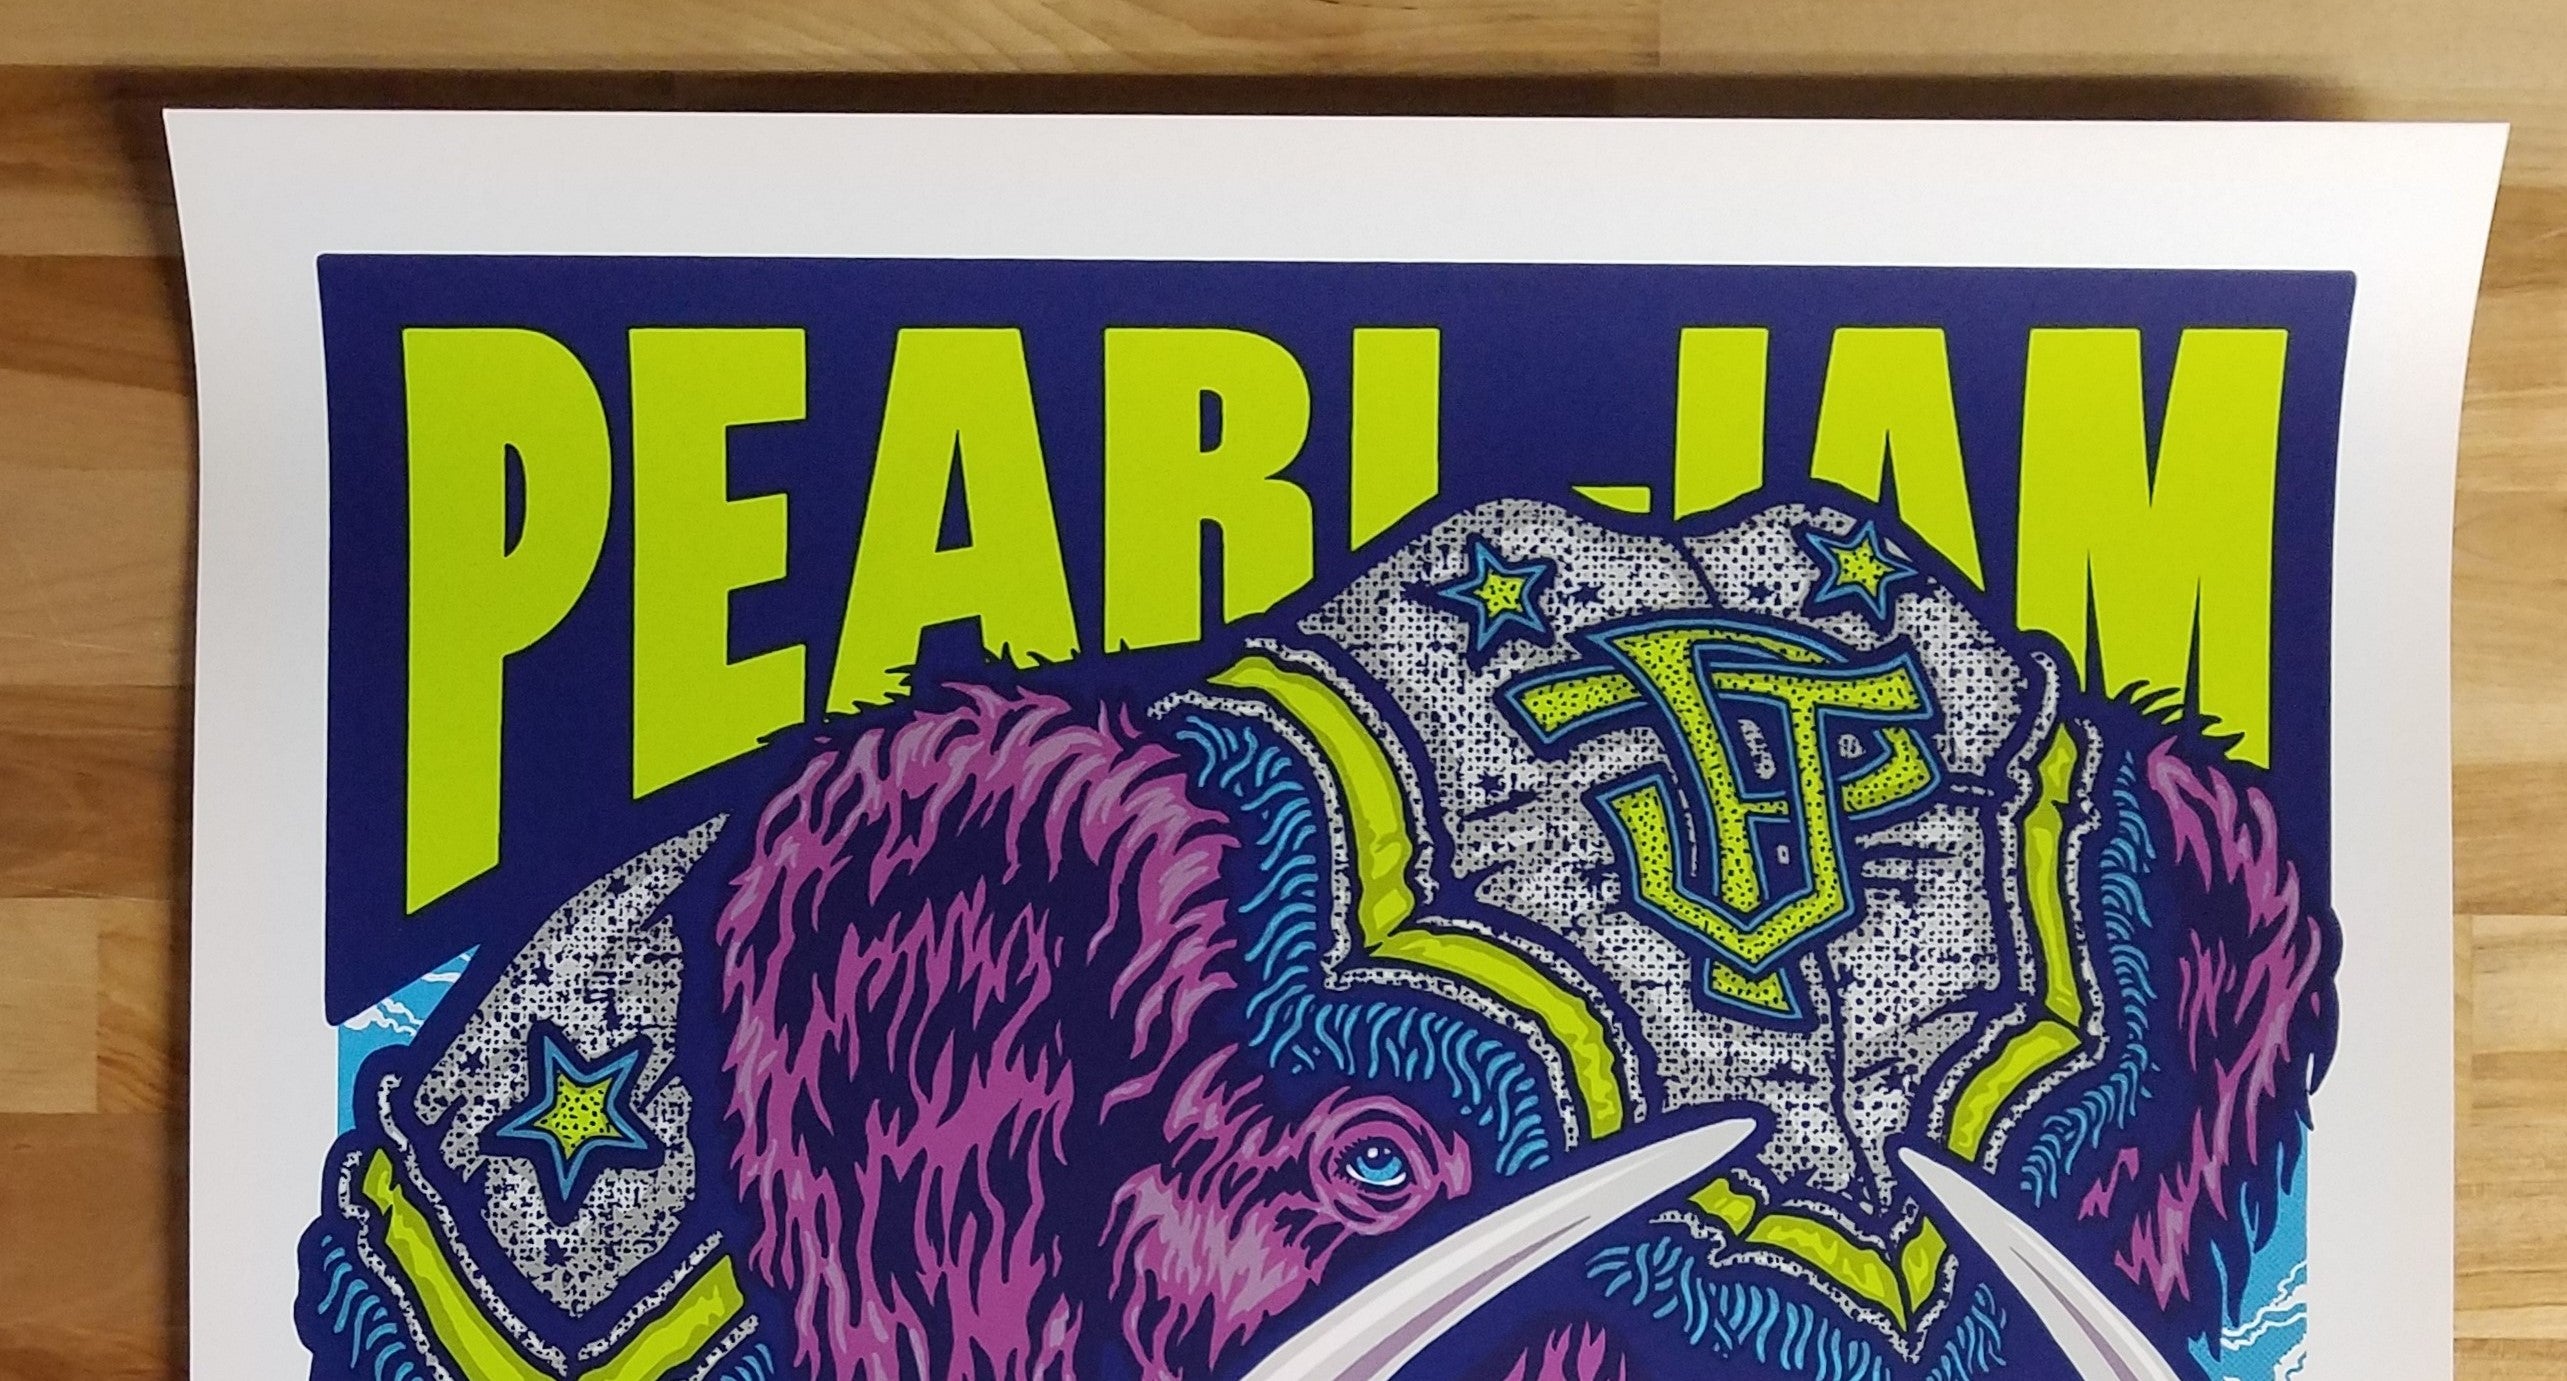 Title:  Pearl Jam Ames Bros Wrigley Field 2018  Poster artist:  Ames Bros. Edition:   Type: Size:  18" x 24" Location:  Chicago, Illiniois Venue:  Wrigley Field Notes:  For the two Wrigley Field shows taking place on August 18th & August 20th, 2018.  Unsigned and Unnumbered - released on August 16, 2018 at the Wrigley Field Merch Tent across the street from the field.